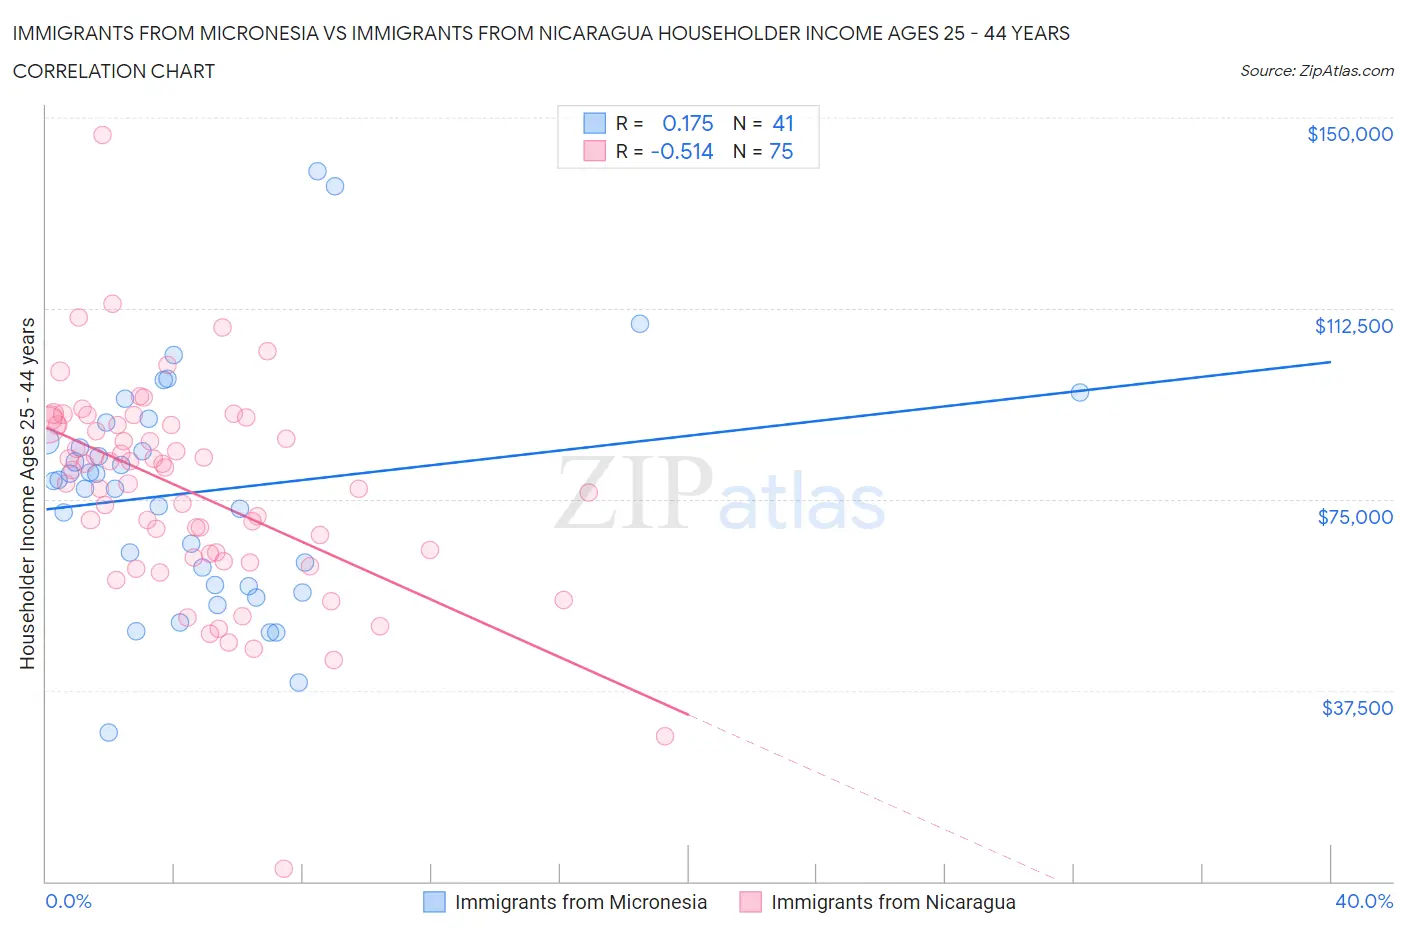 Immigrants from Micronesia vs Immigrants from Nicaragua Householder Income Ages 25 - 44 years